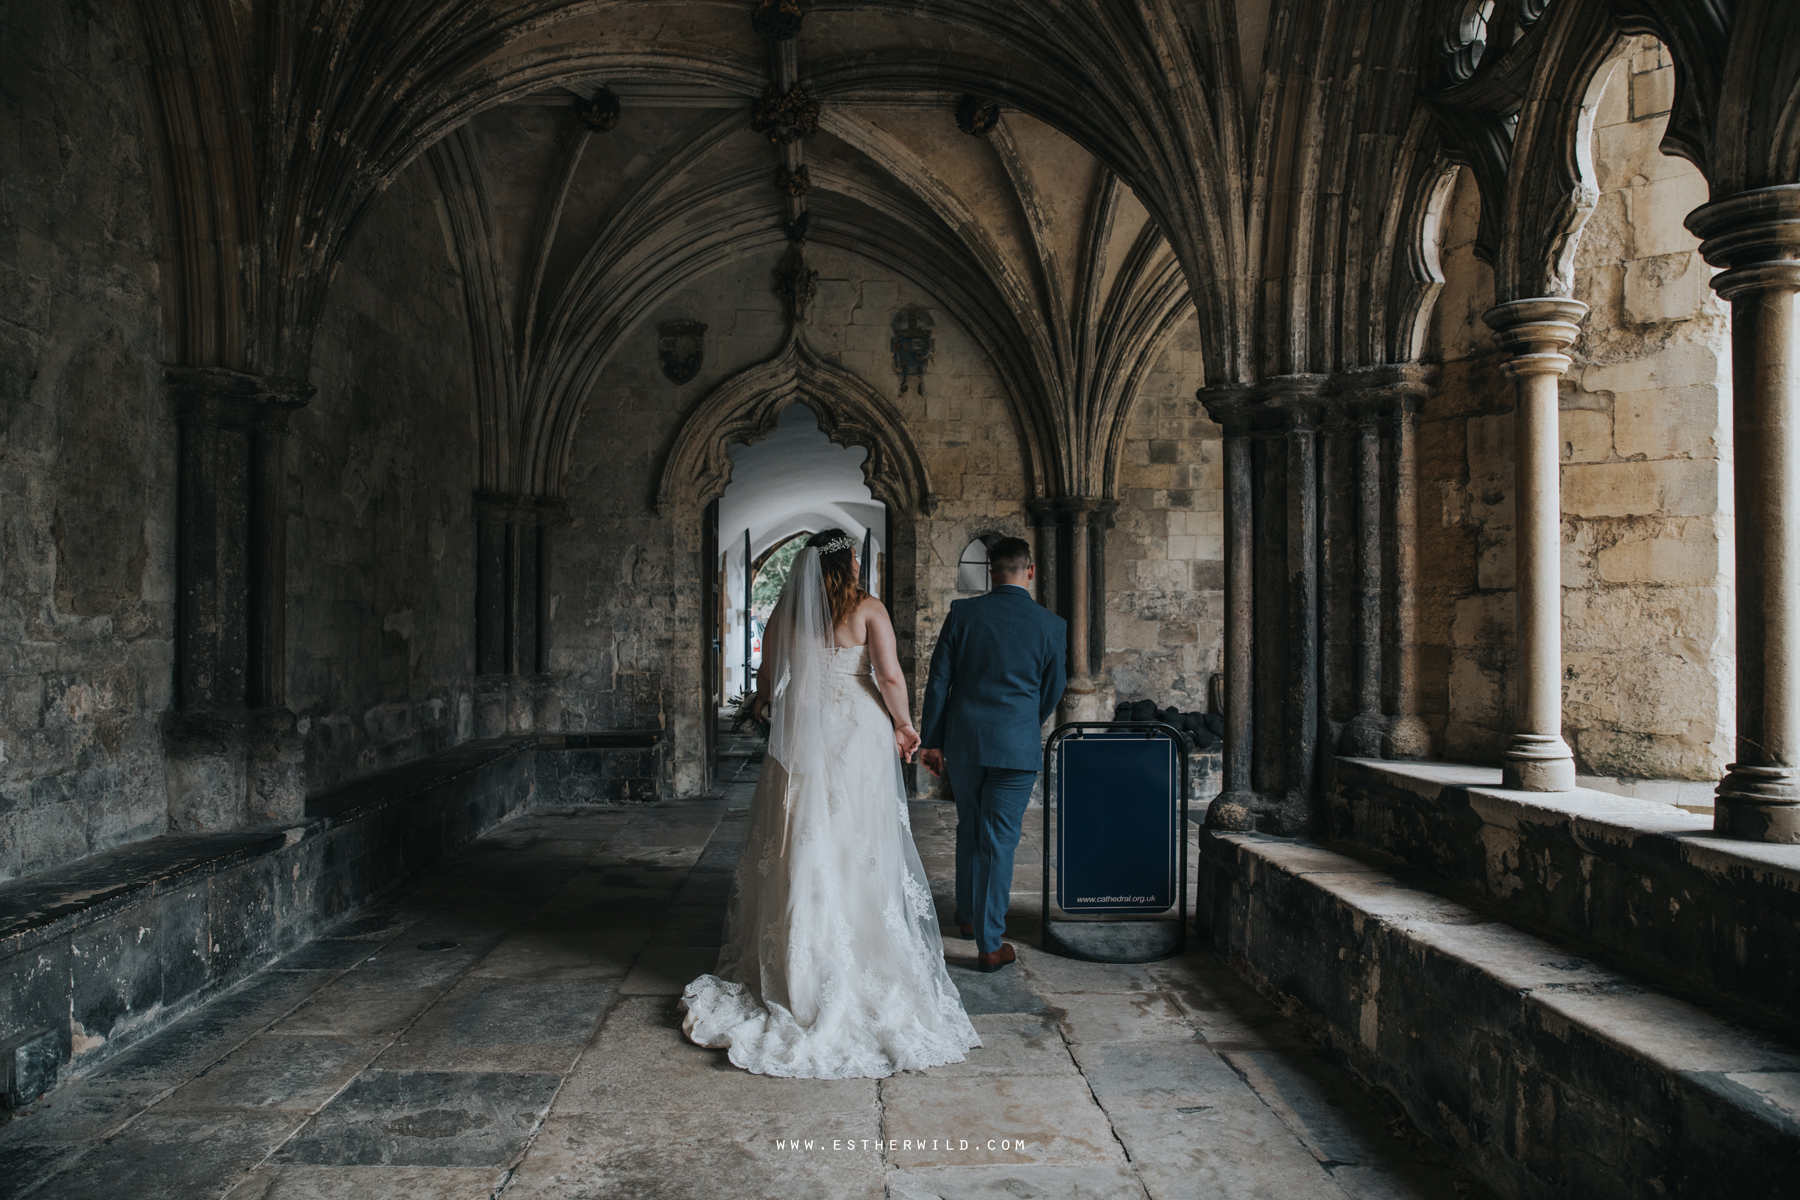 Norwich_Castle_Arcade_Grosvenor_Chip_Birdcage_Cathedral_Cloisters_Refectory_Wedding_Photography_Esther_Wild_Photographer_Norfolk_Kings_Lynn_3R8A1966.jpg